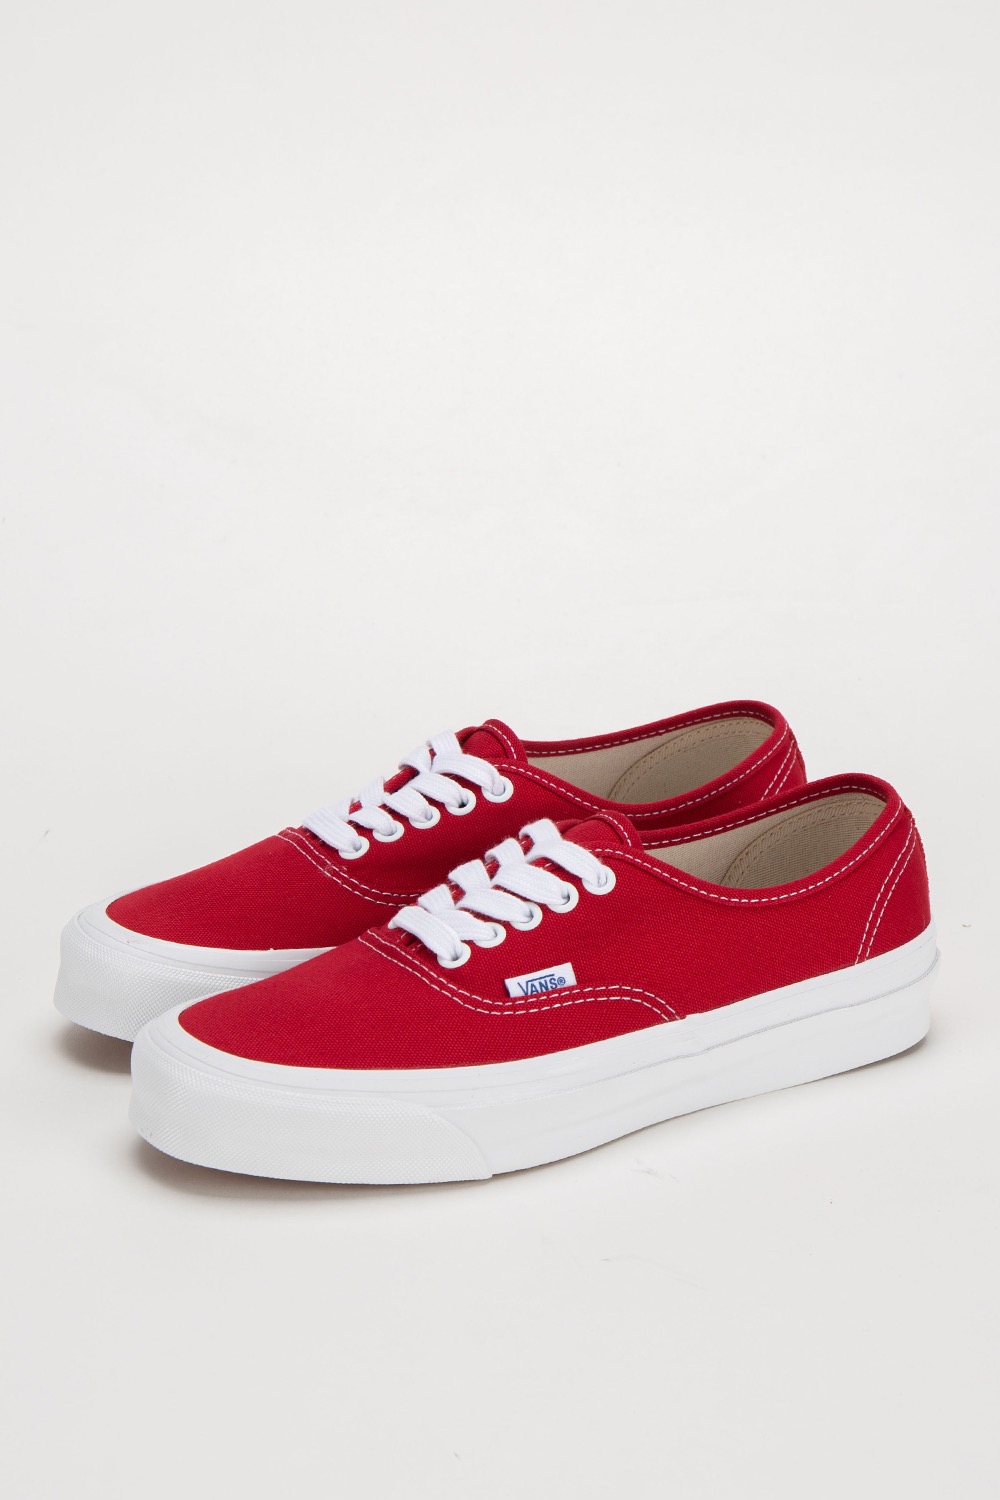 (restock)OG AUTHENTIC LX(CANVAS)RED/TRUE WHITE